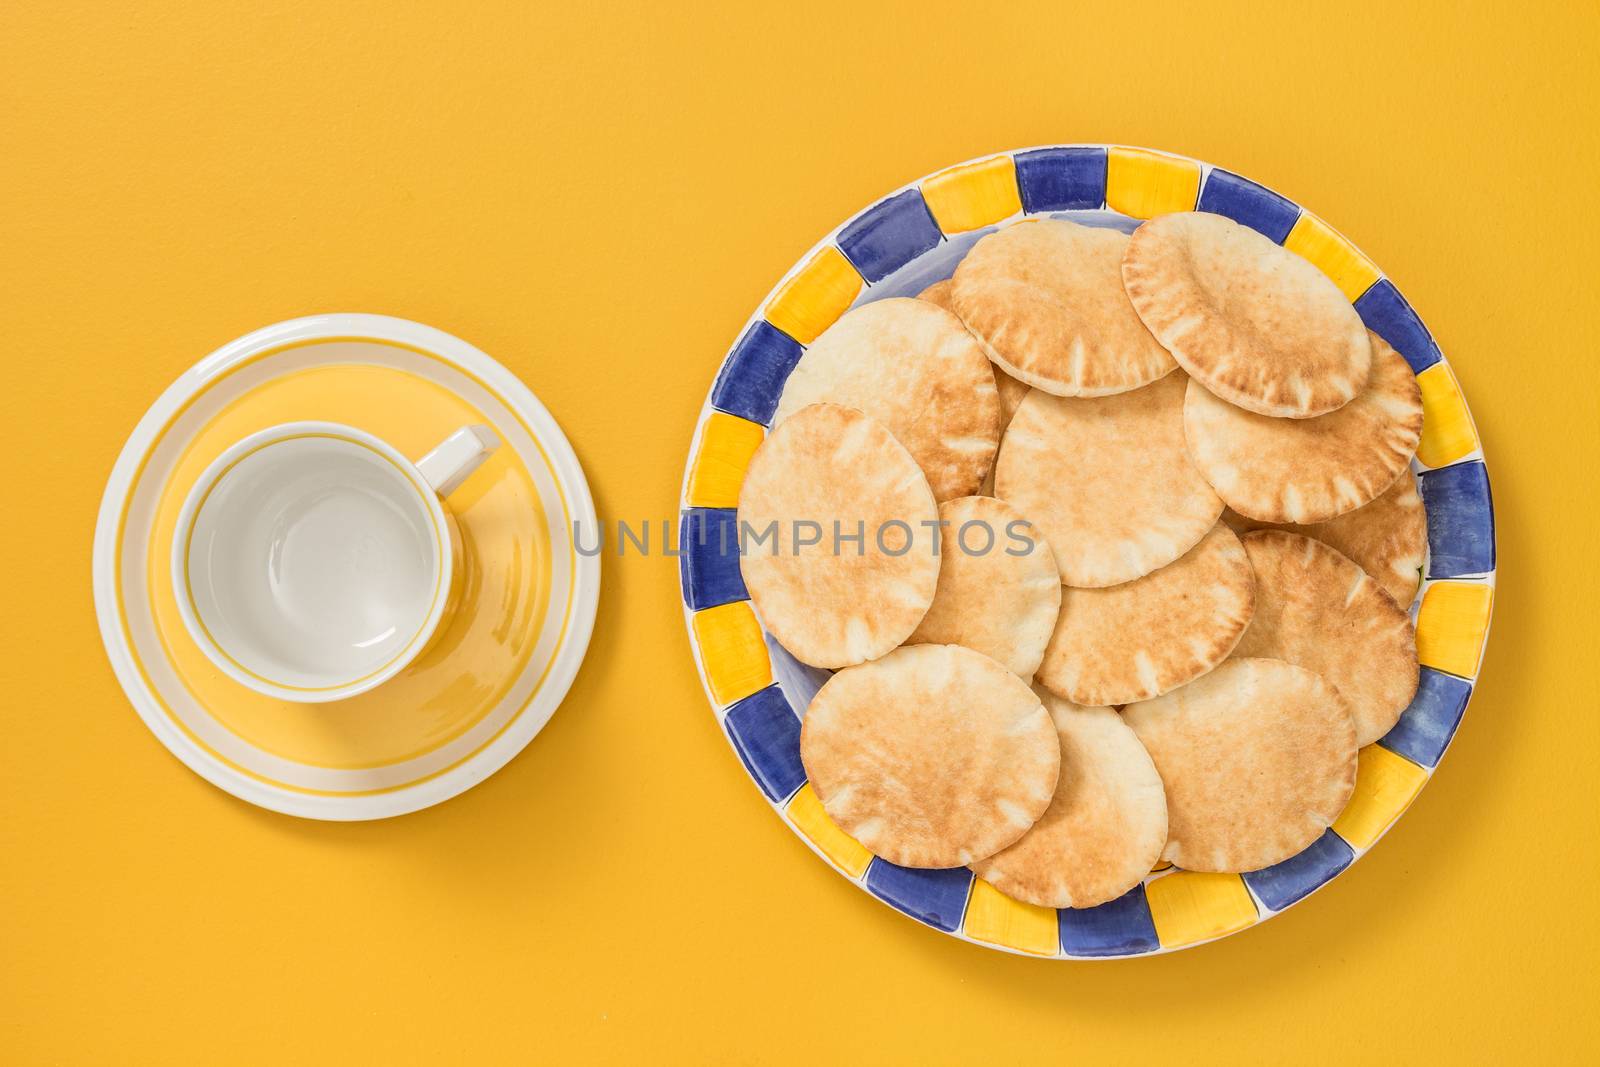 Teacup and plate with pita bread on yellow background by anikasalsera